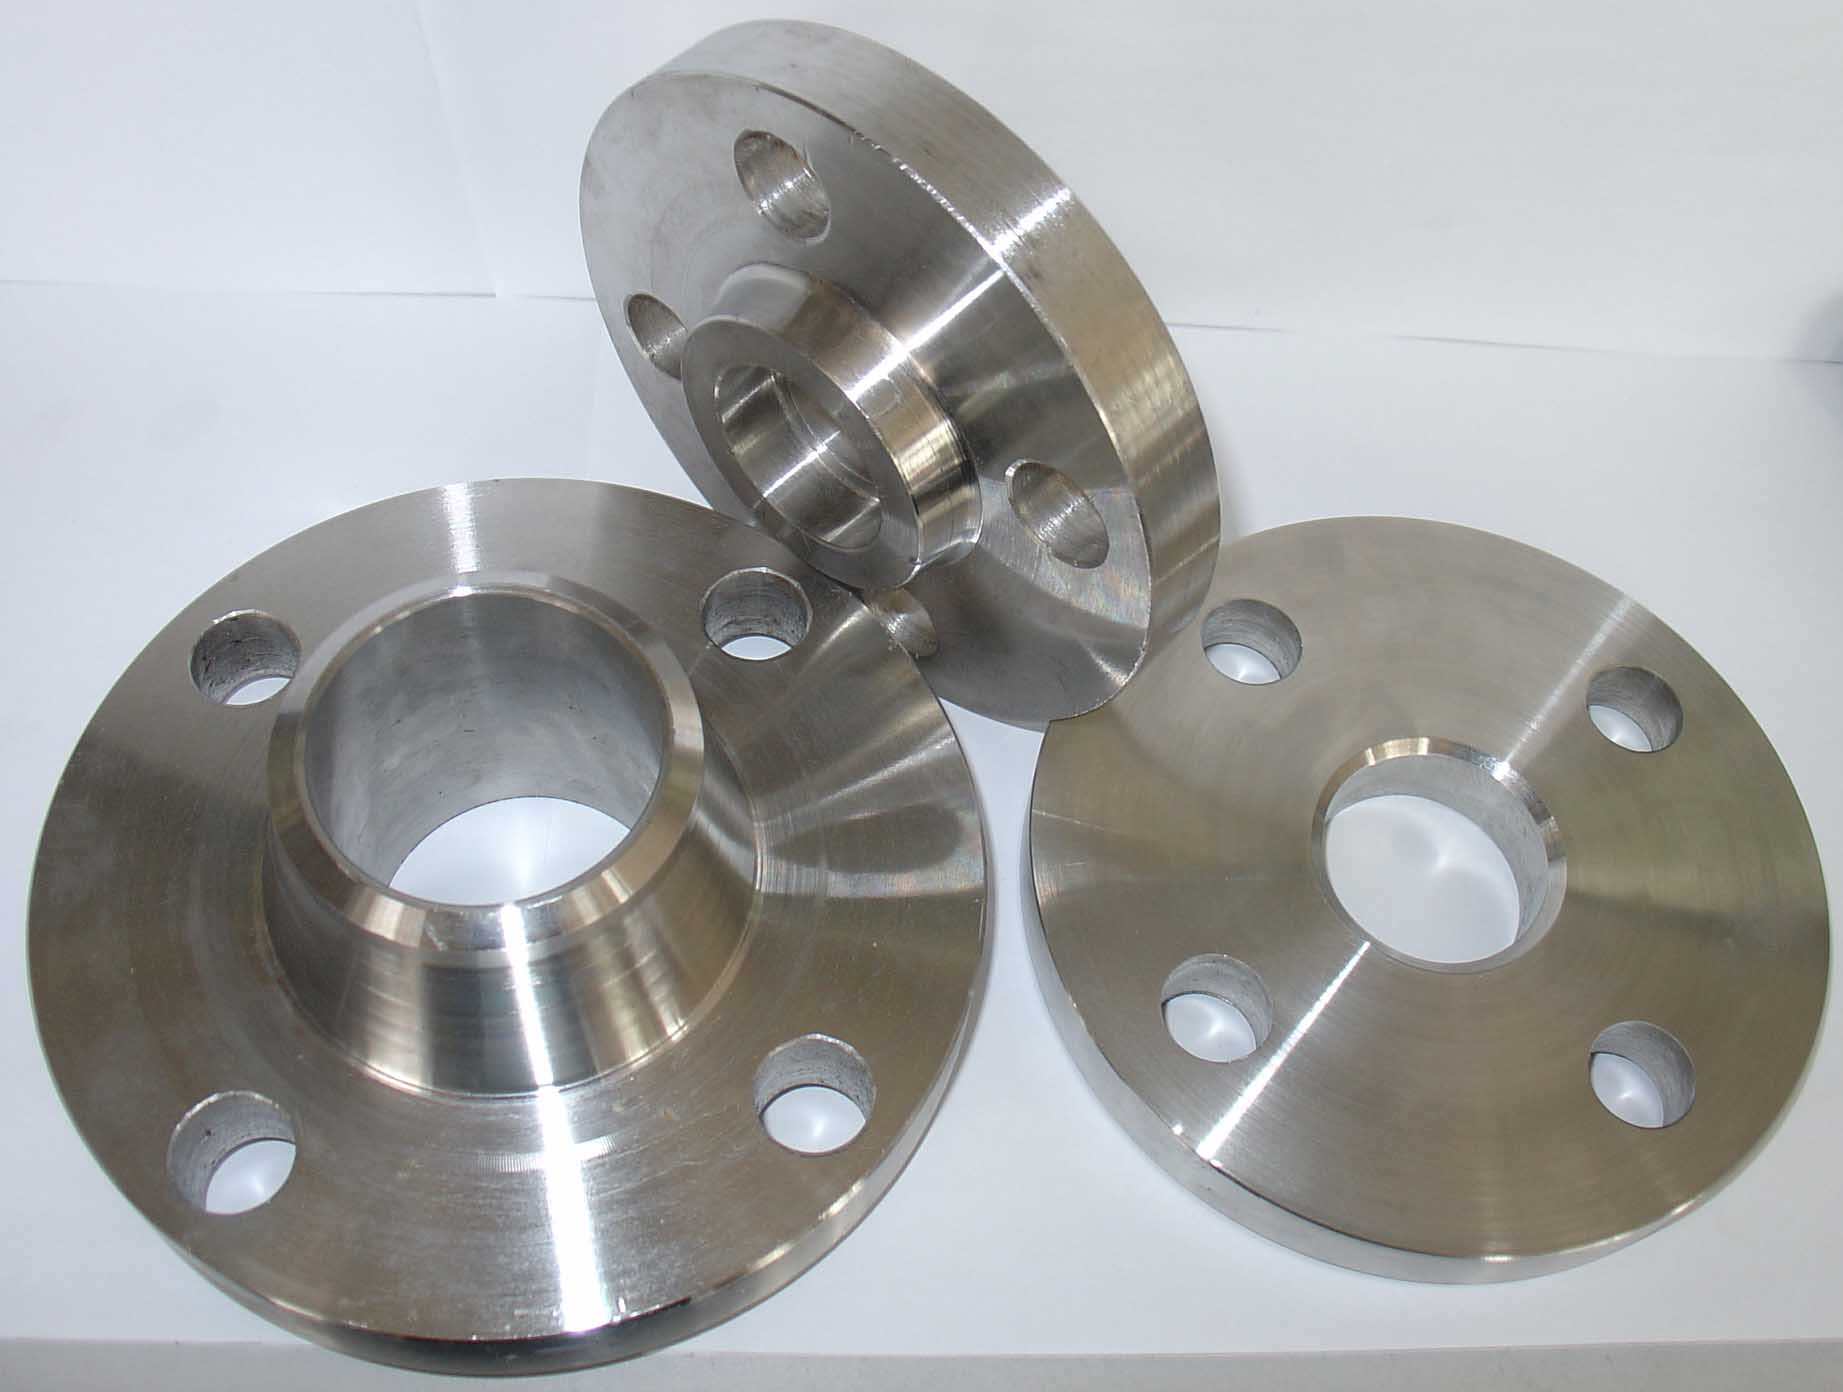 What are the common malfunctions and problems with flanges？